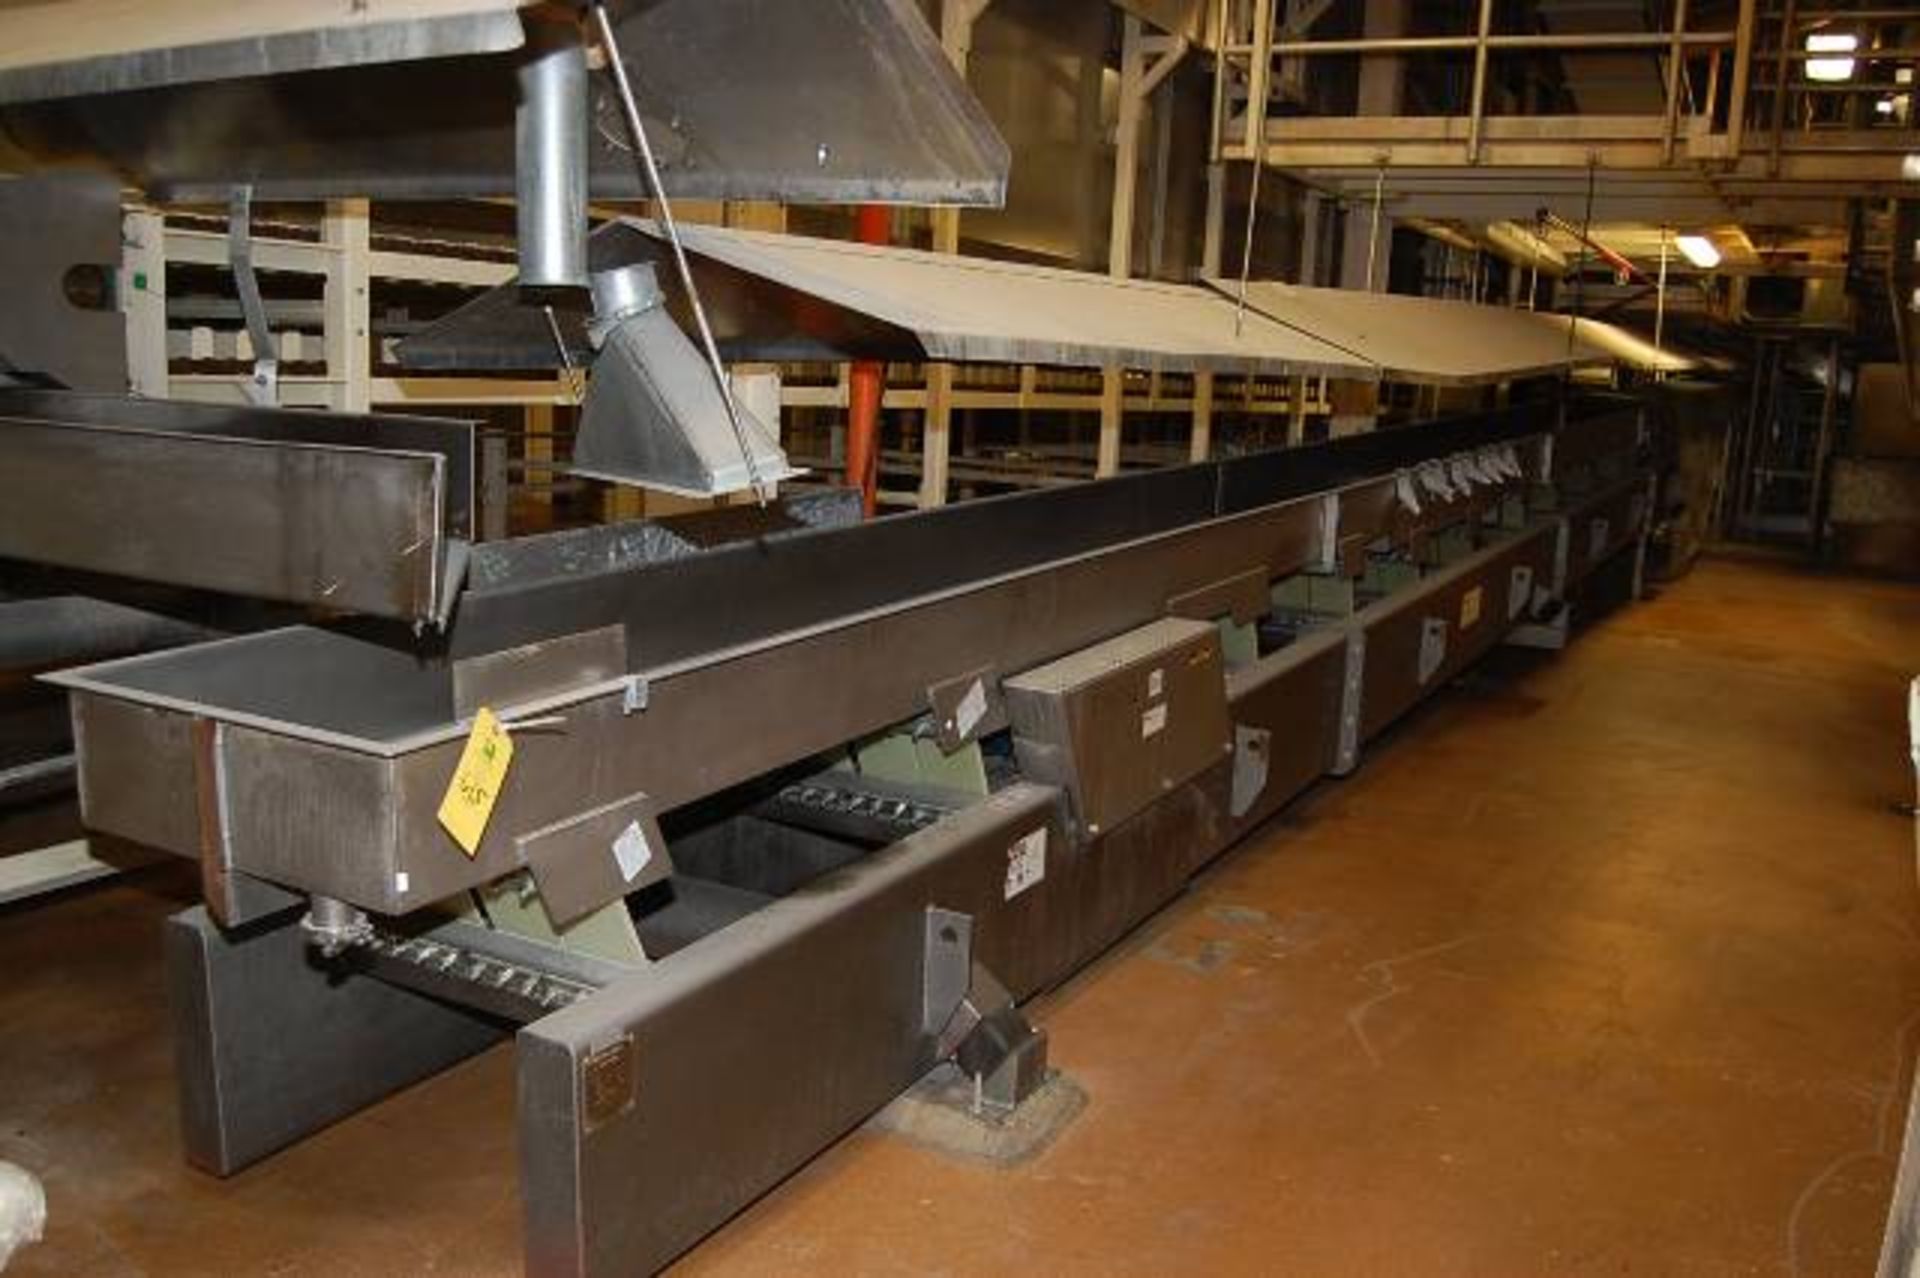 FMC Model #BL Vibratory Conveyor, Approx. 80 ft. Length x 23 in. Wide, Includes Hanging Cover, 460